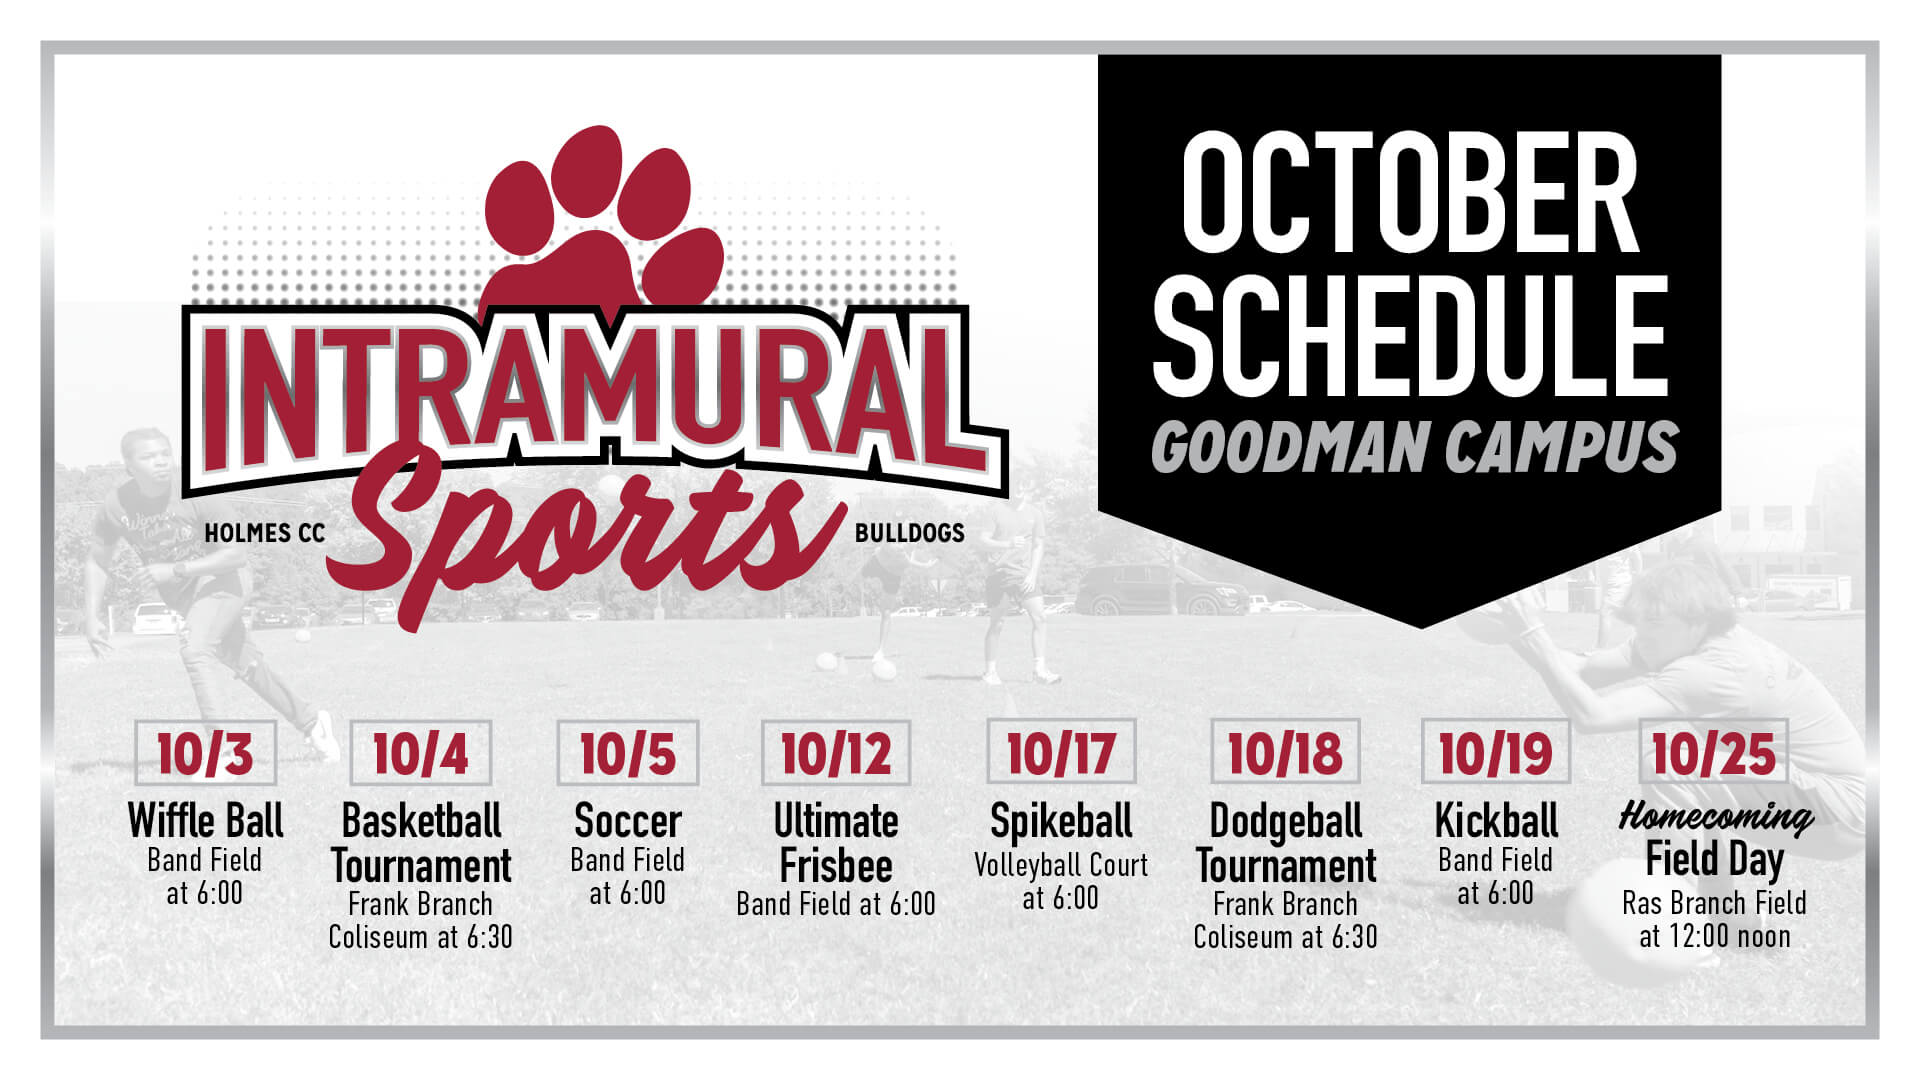 Oct IntramuralsSched EventSize SMALL